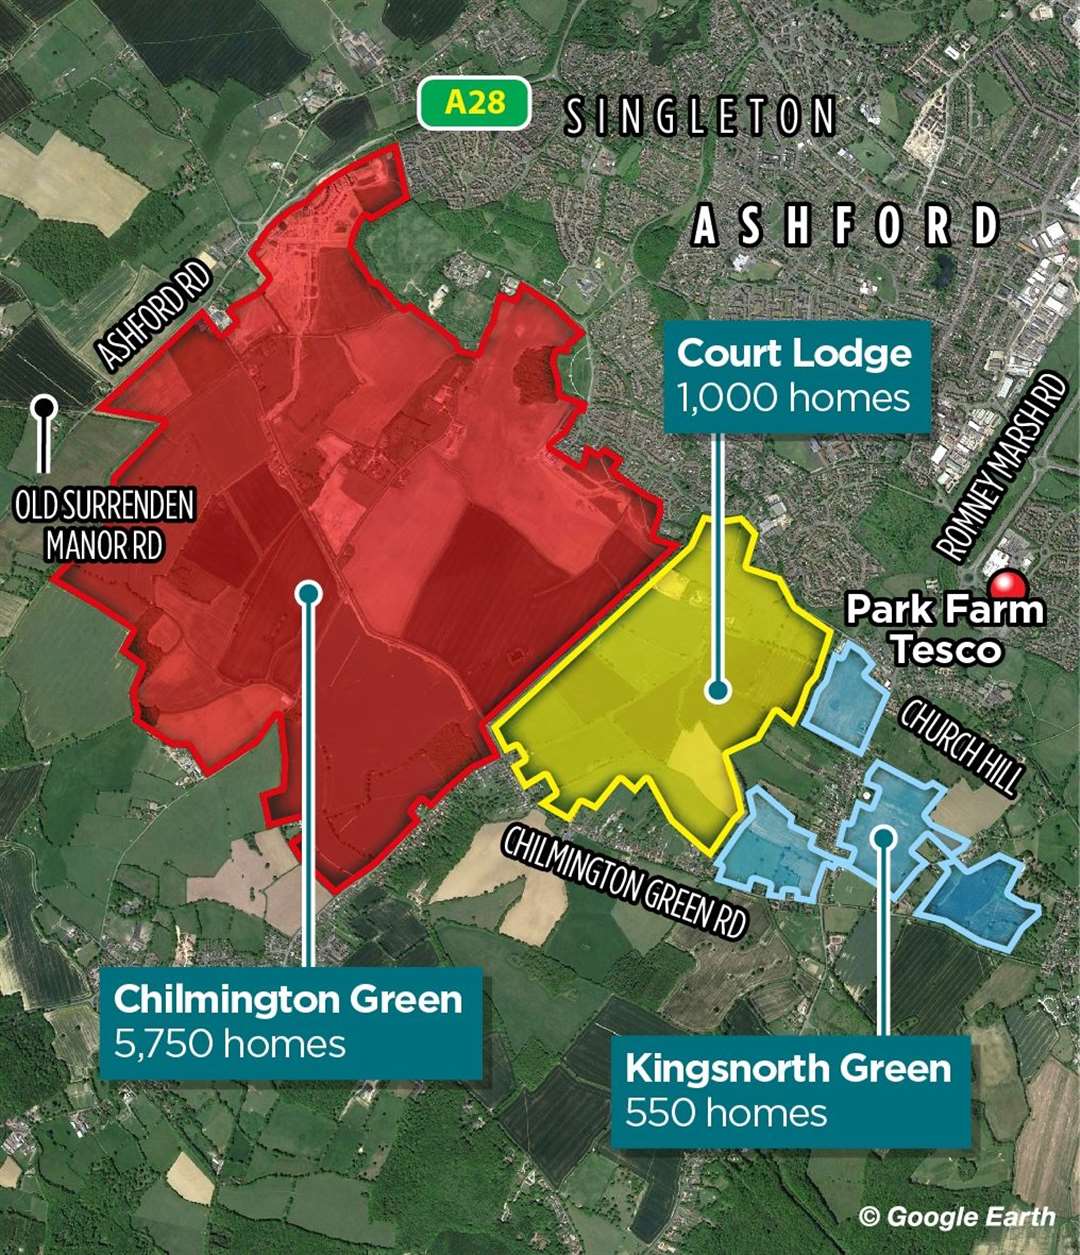 If approved, the Kingsnorth Green development would form part of the South of Ashford Garden Community (SAGC) with Court Lodge and Chilmington Green